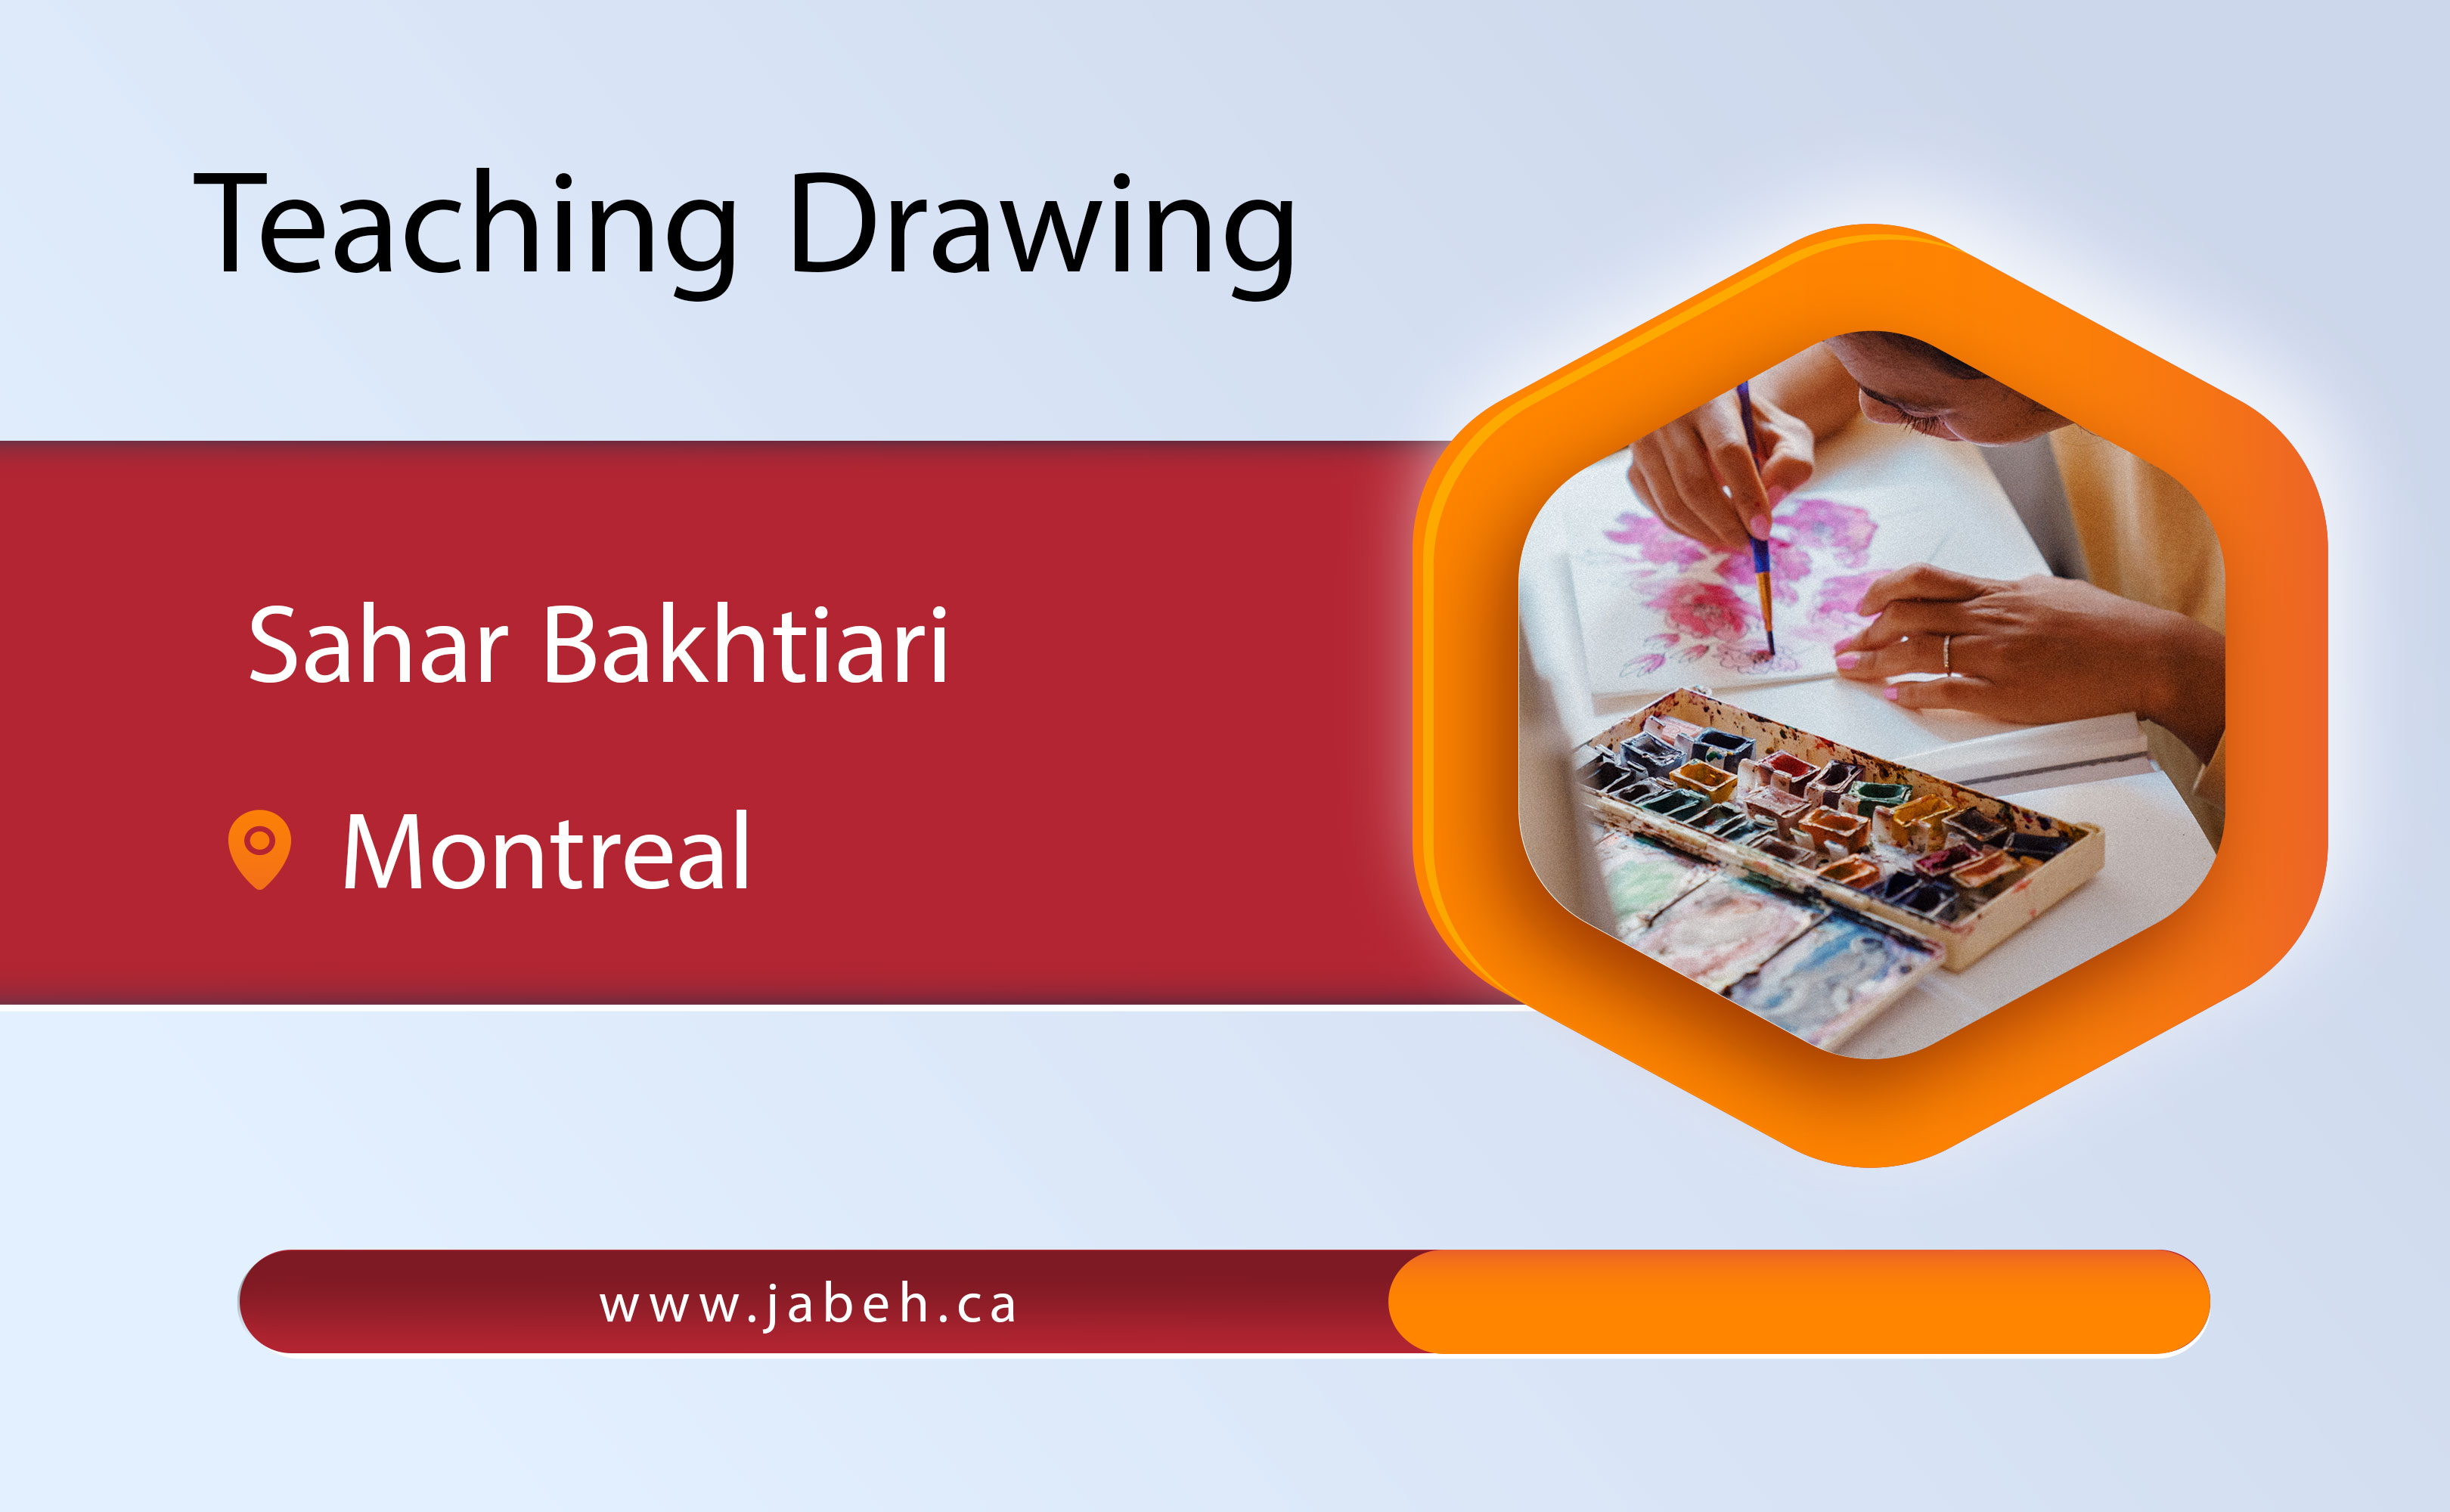 Painting and drawing training of Sahar Bakhtiari in Montreal